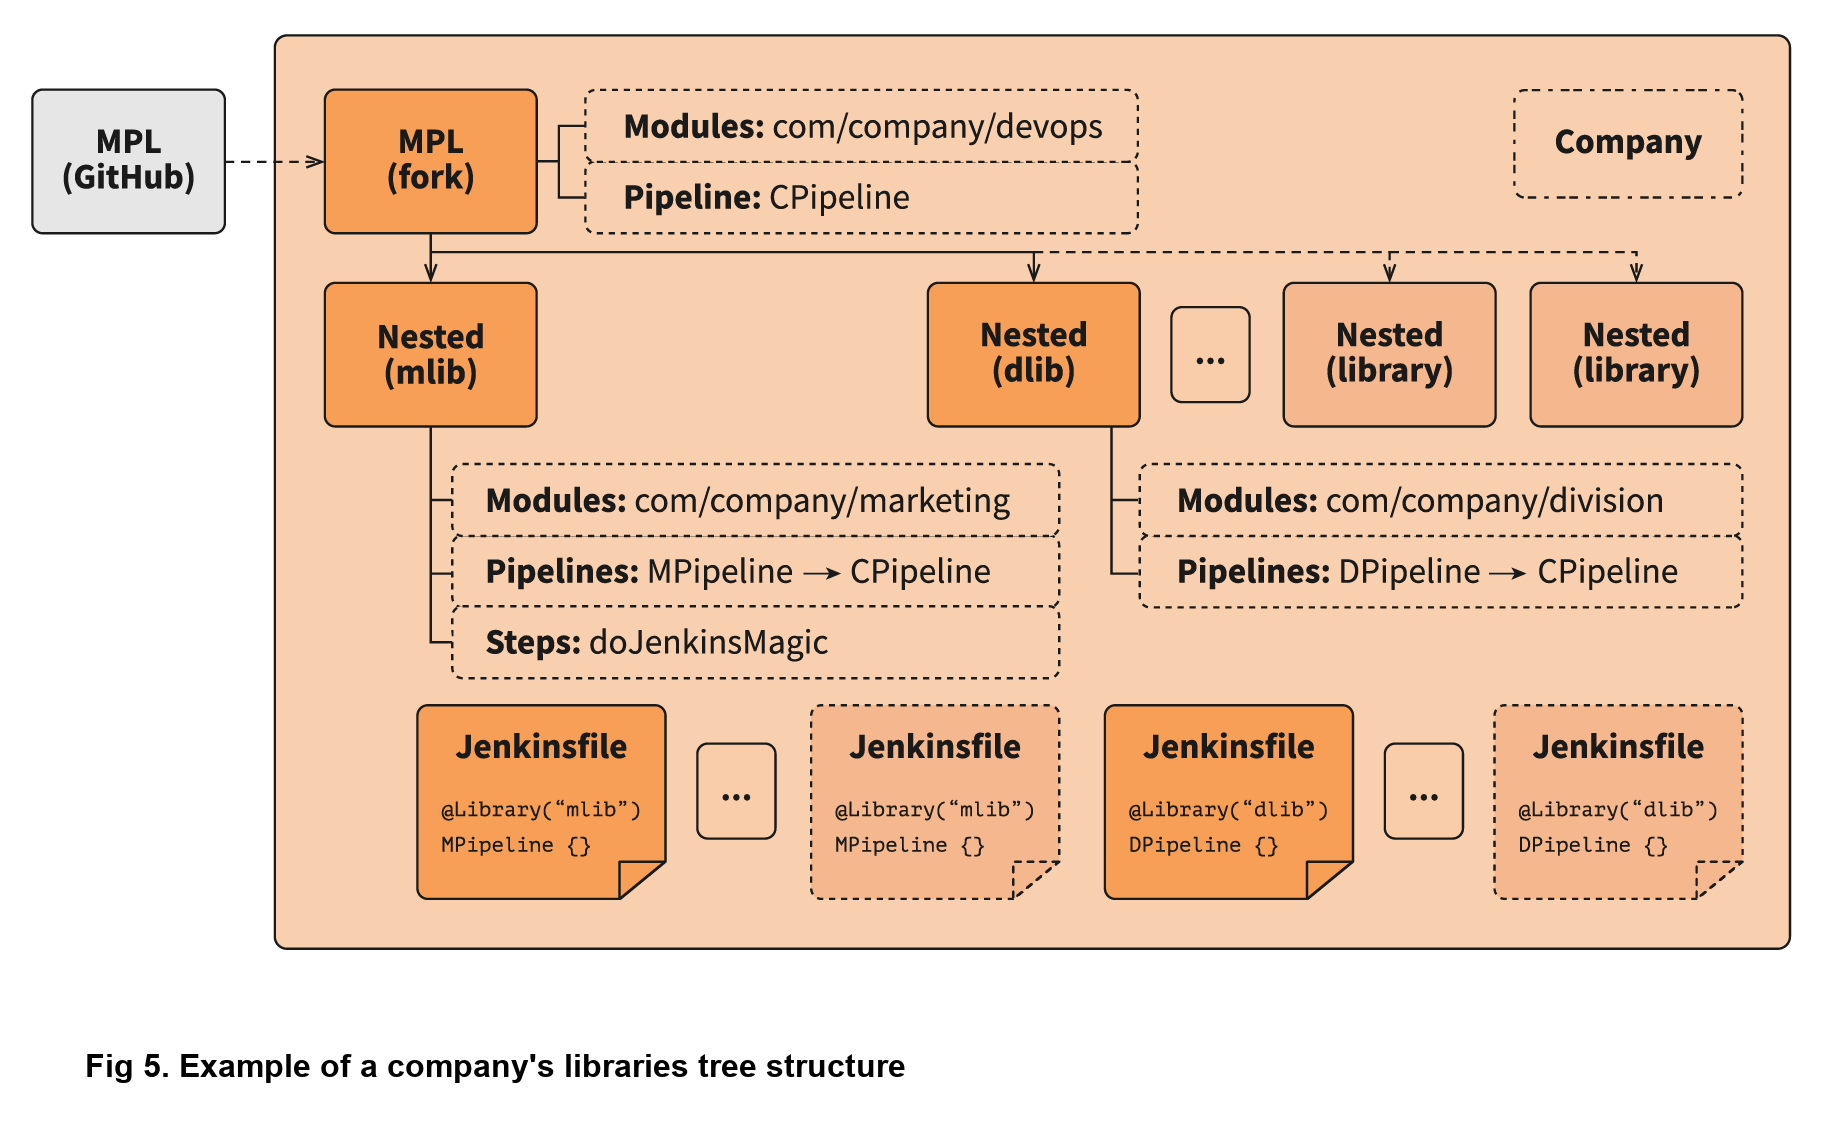 Fig 5. Example of company’s libraries tree structure